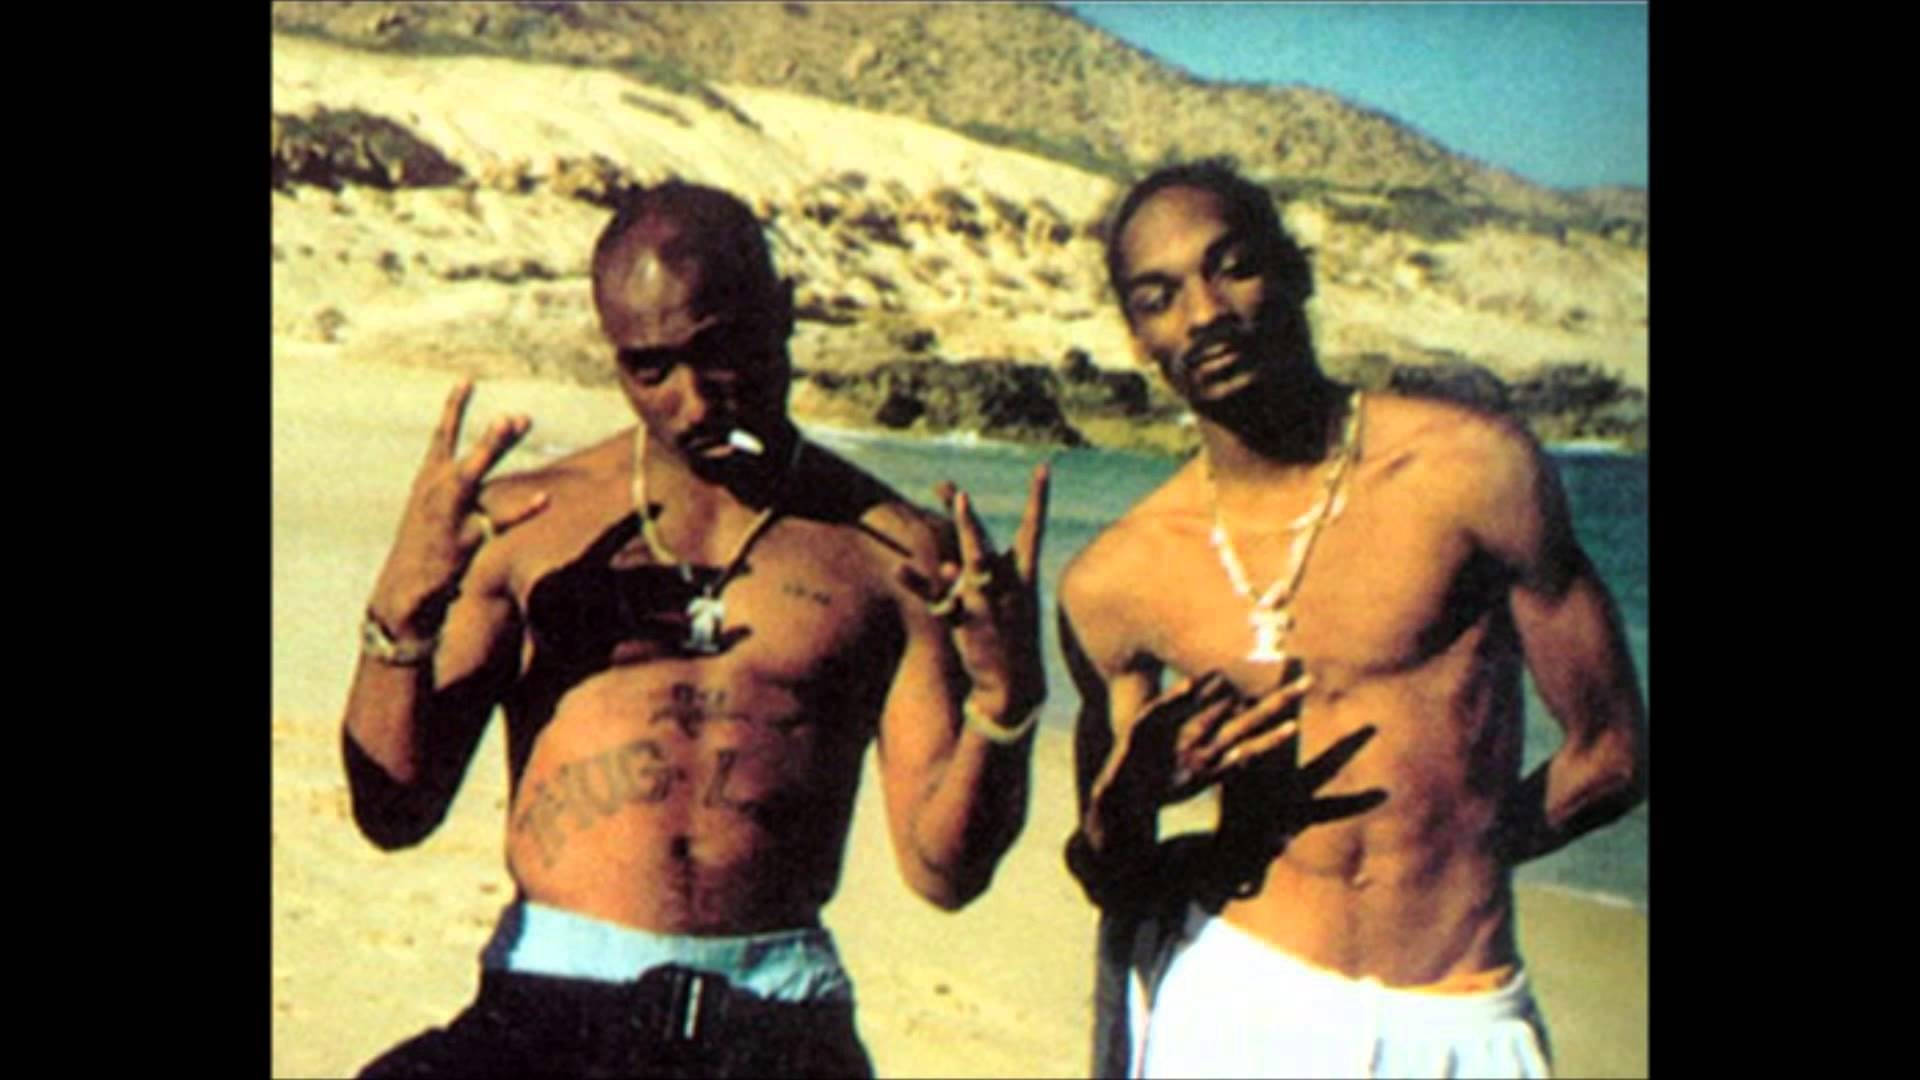 SnoopDogg and 2pac snoop dogg tupac 2pac rap hip hop classic  legends HD phone wallpaper  Peakpx